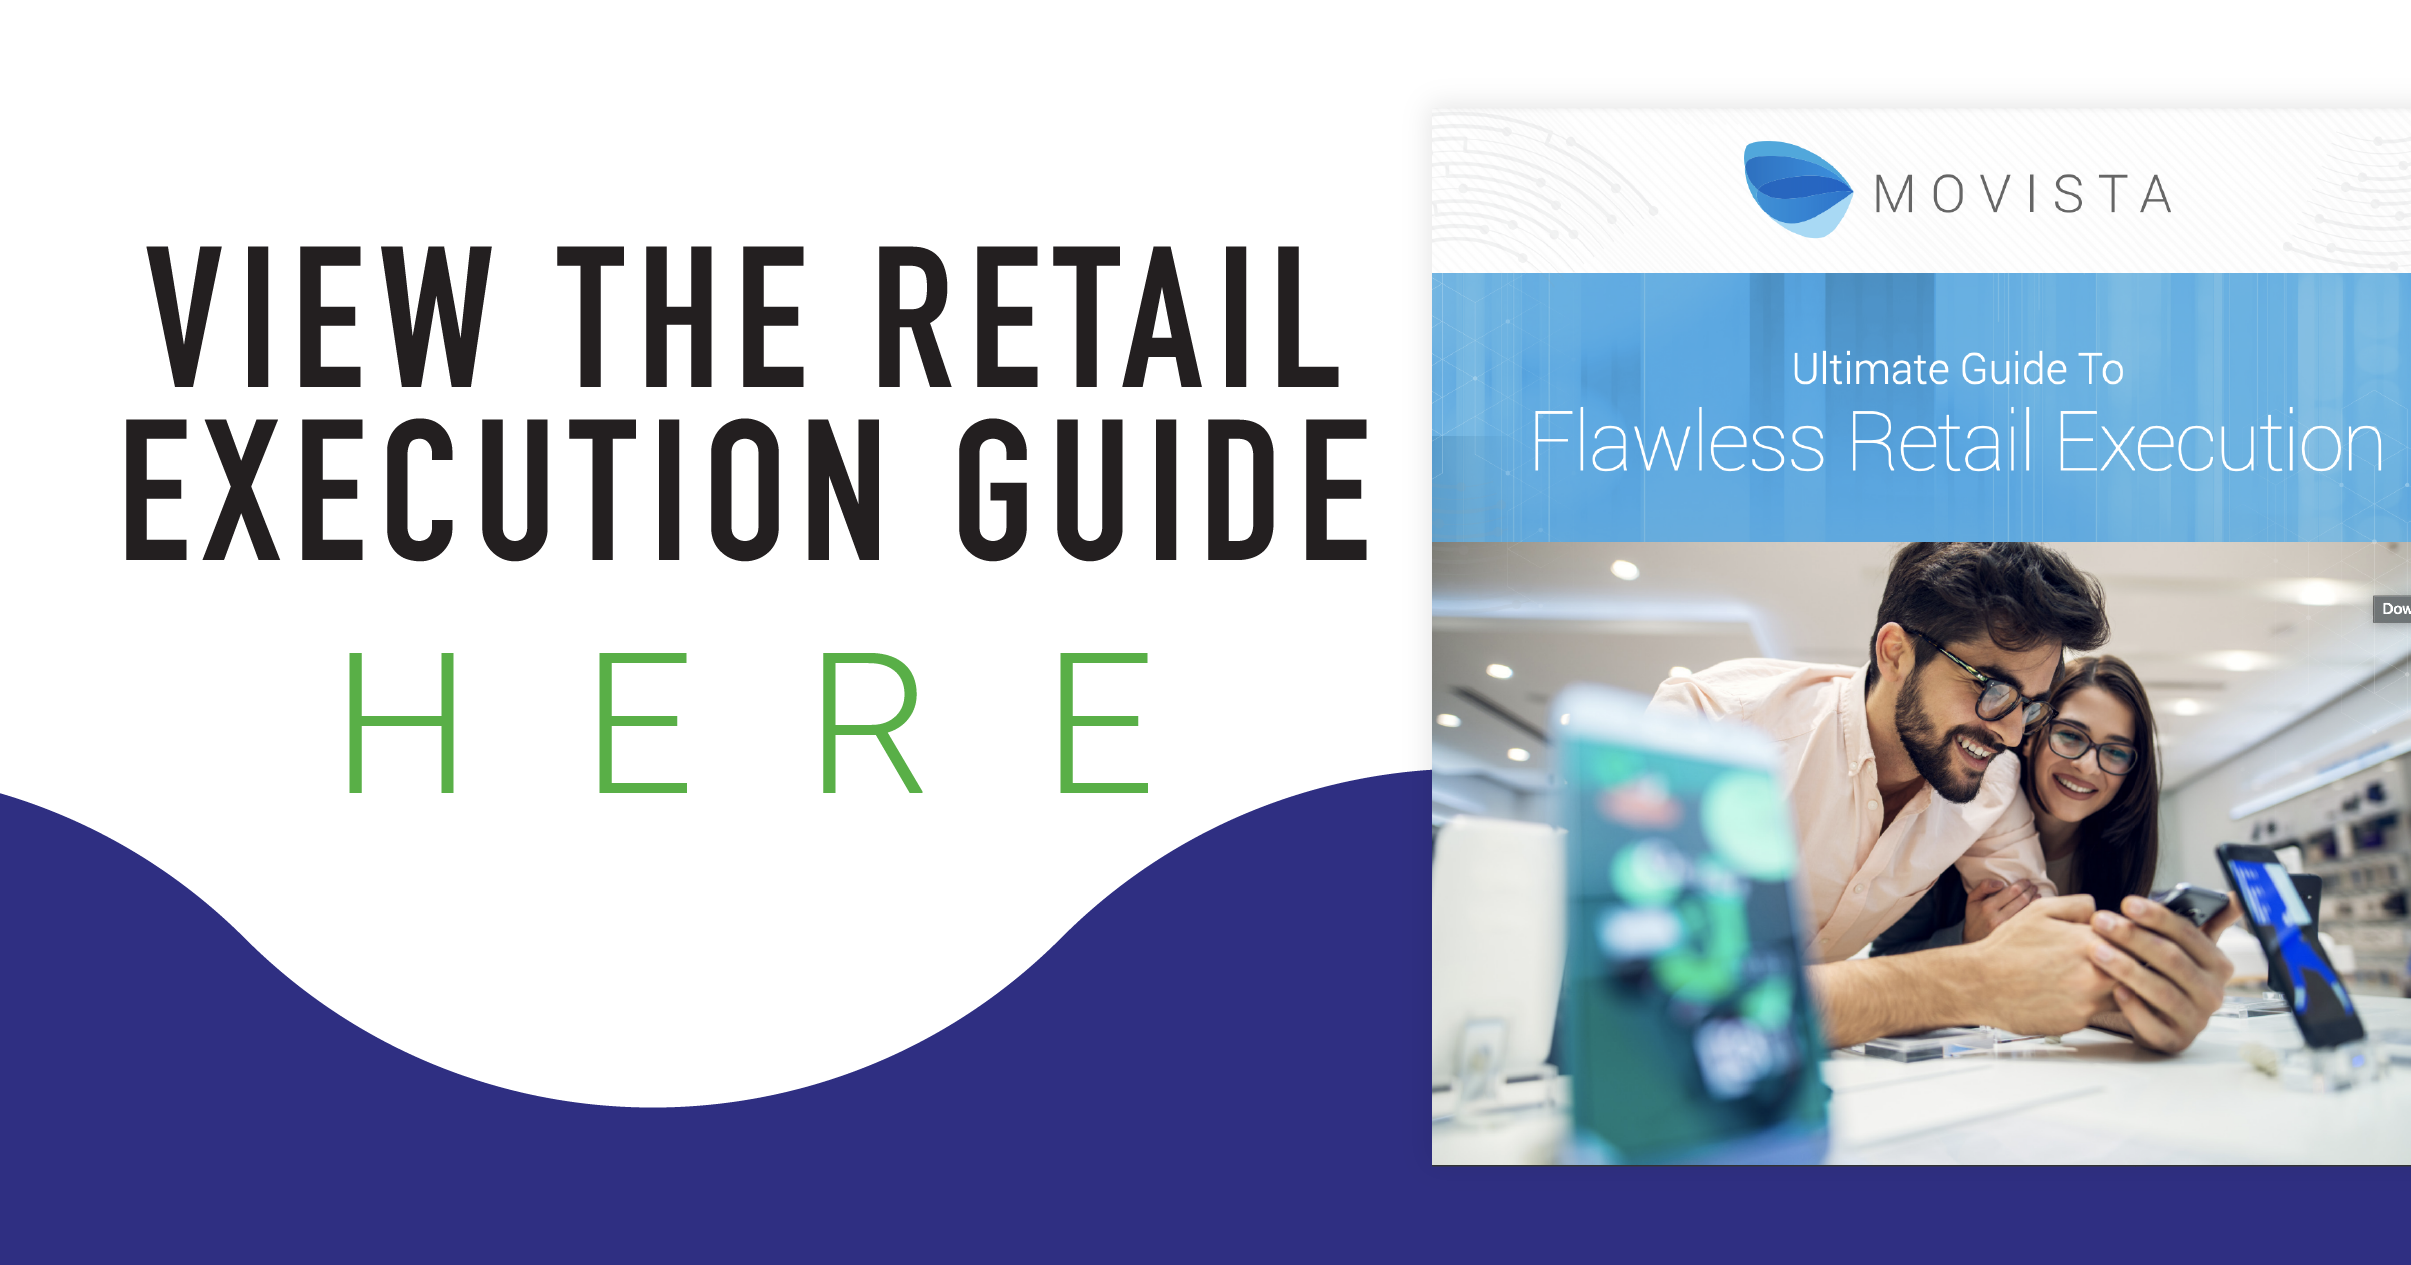 Retail Execution Guide by Movista for flawless shelf execution in retail stores